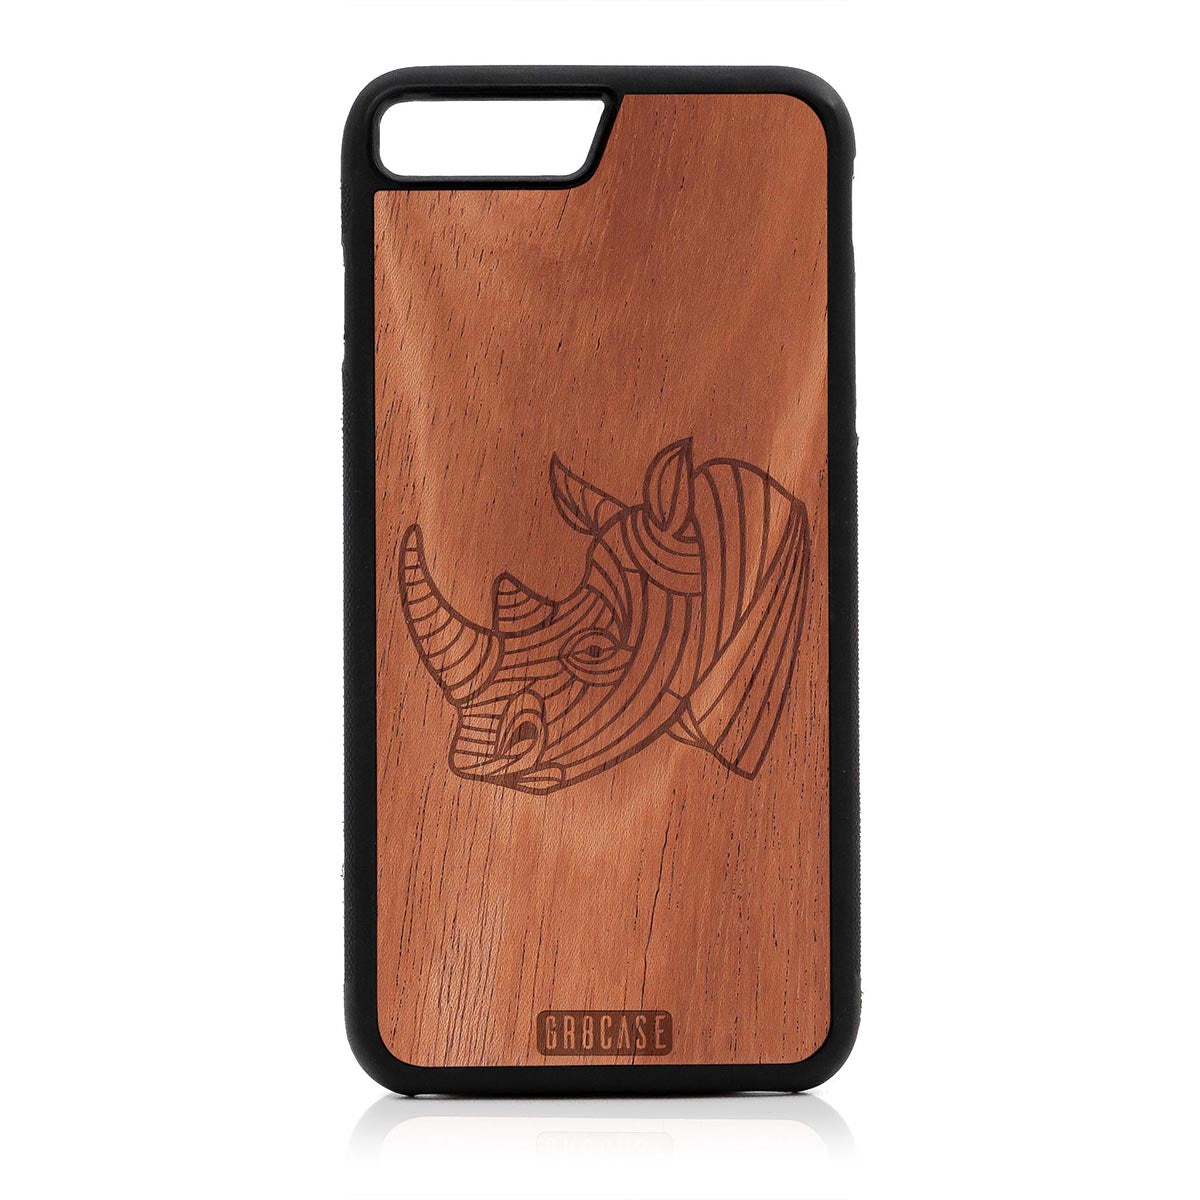 Rhino Design Wood Case For iPhone 7 Plus / 8 Plus by GR8CASE